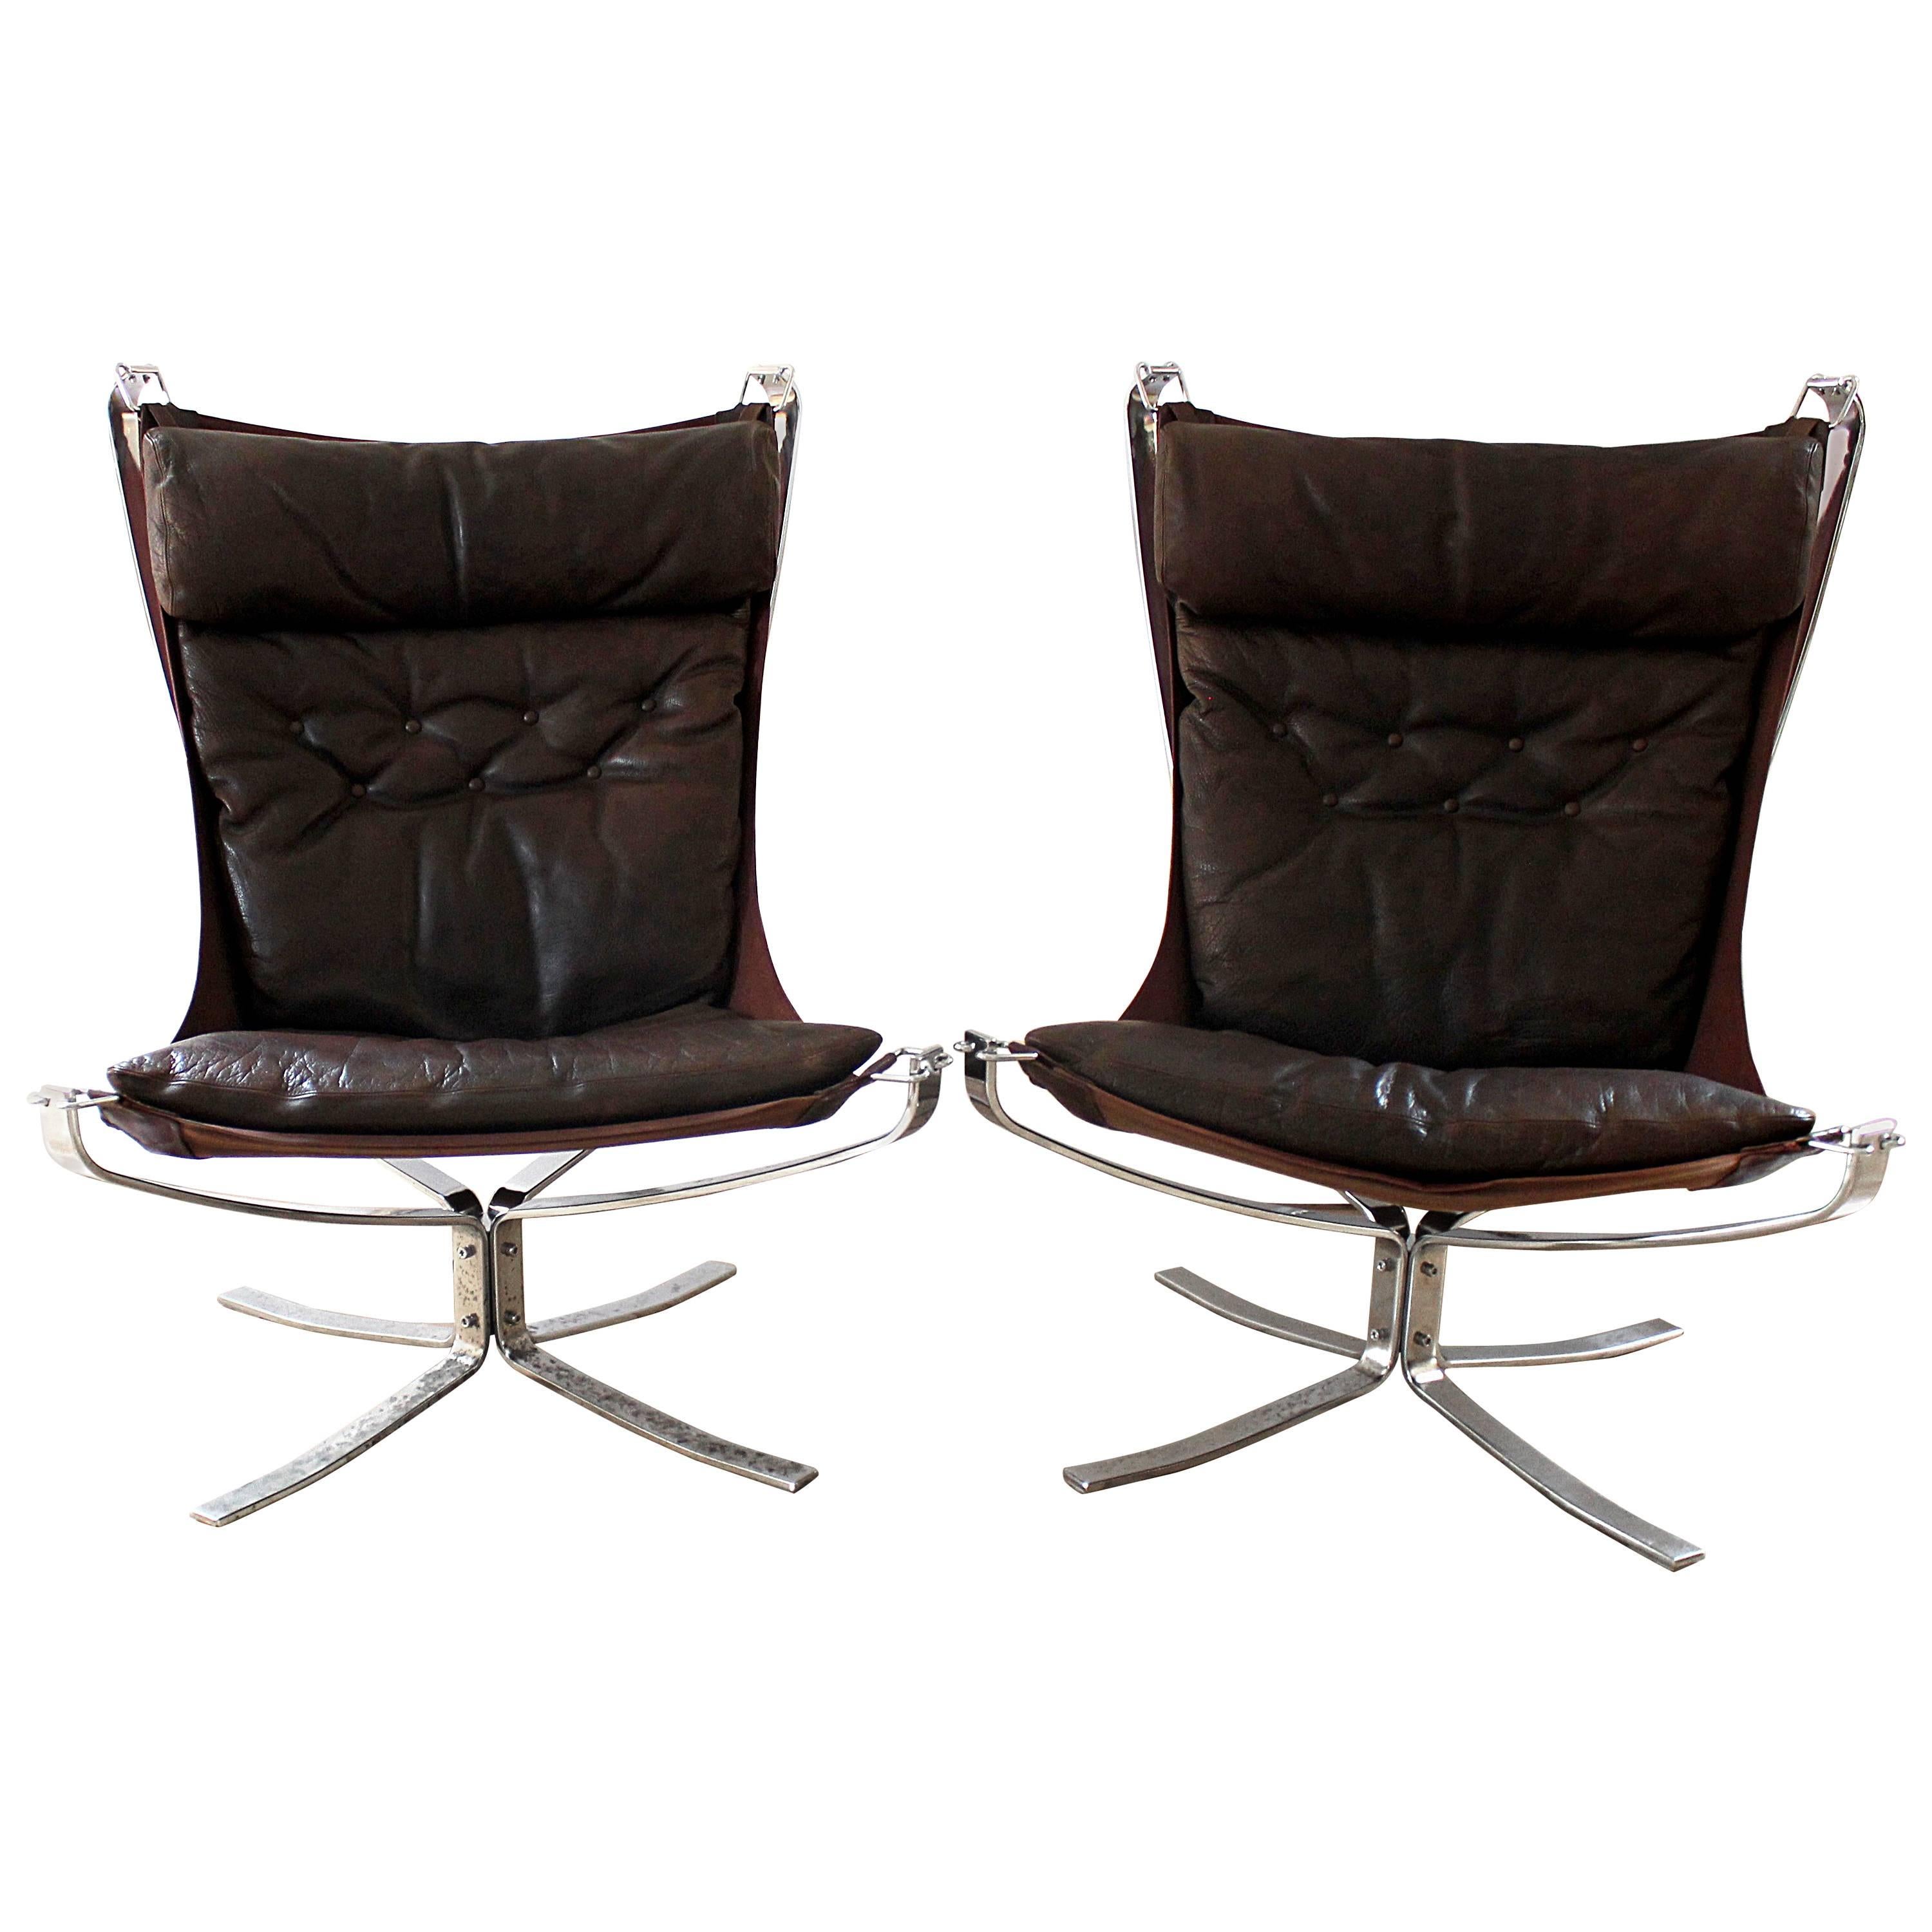 Pair of 1970s High-Backed Leather and Chrome Falcon Chairs by Sigurd Ressell